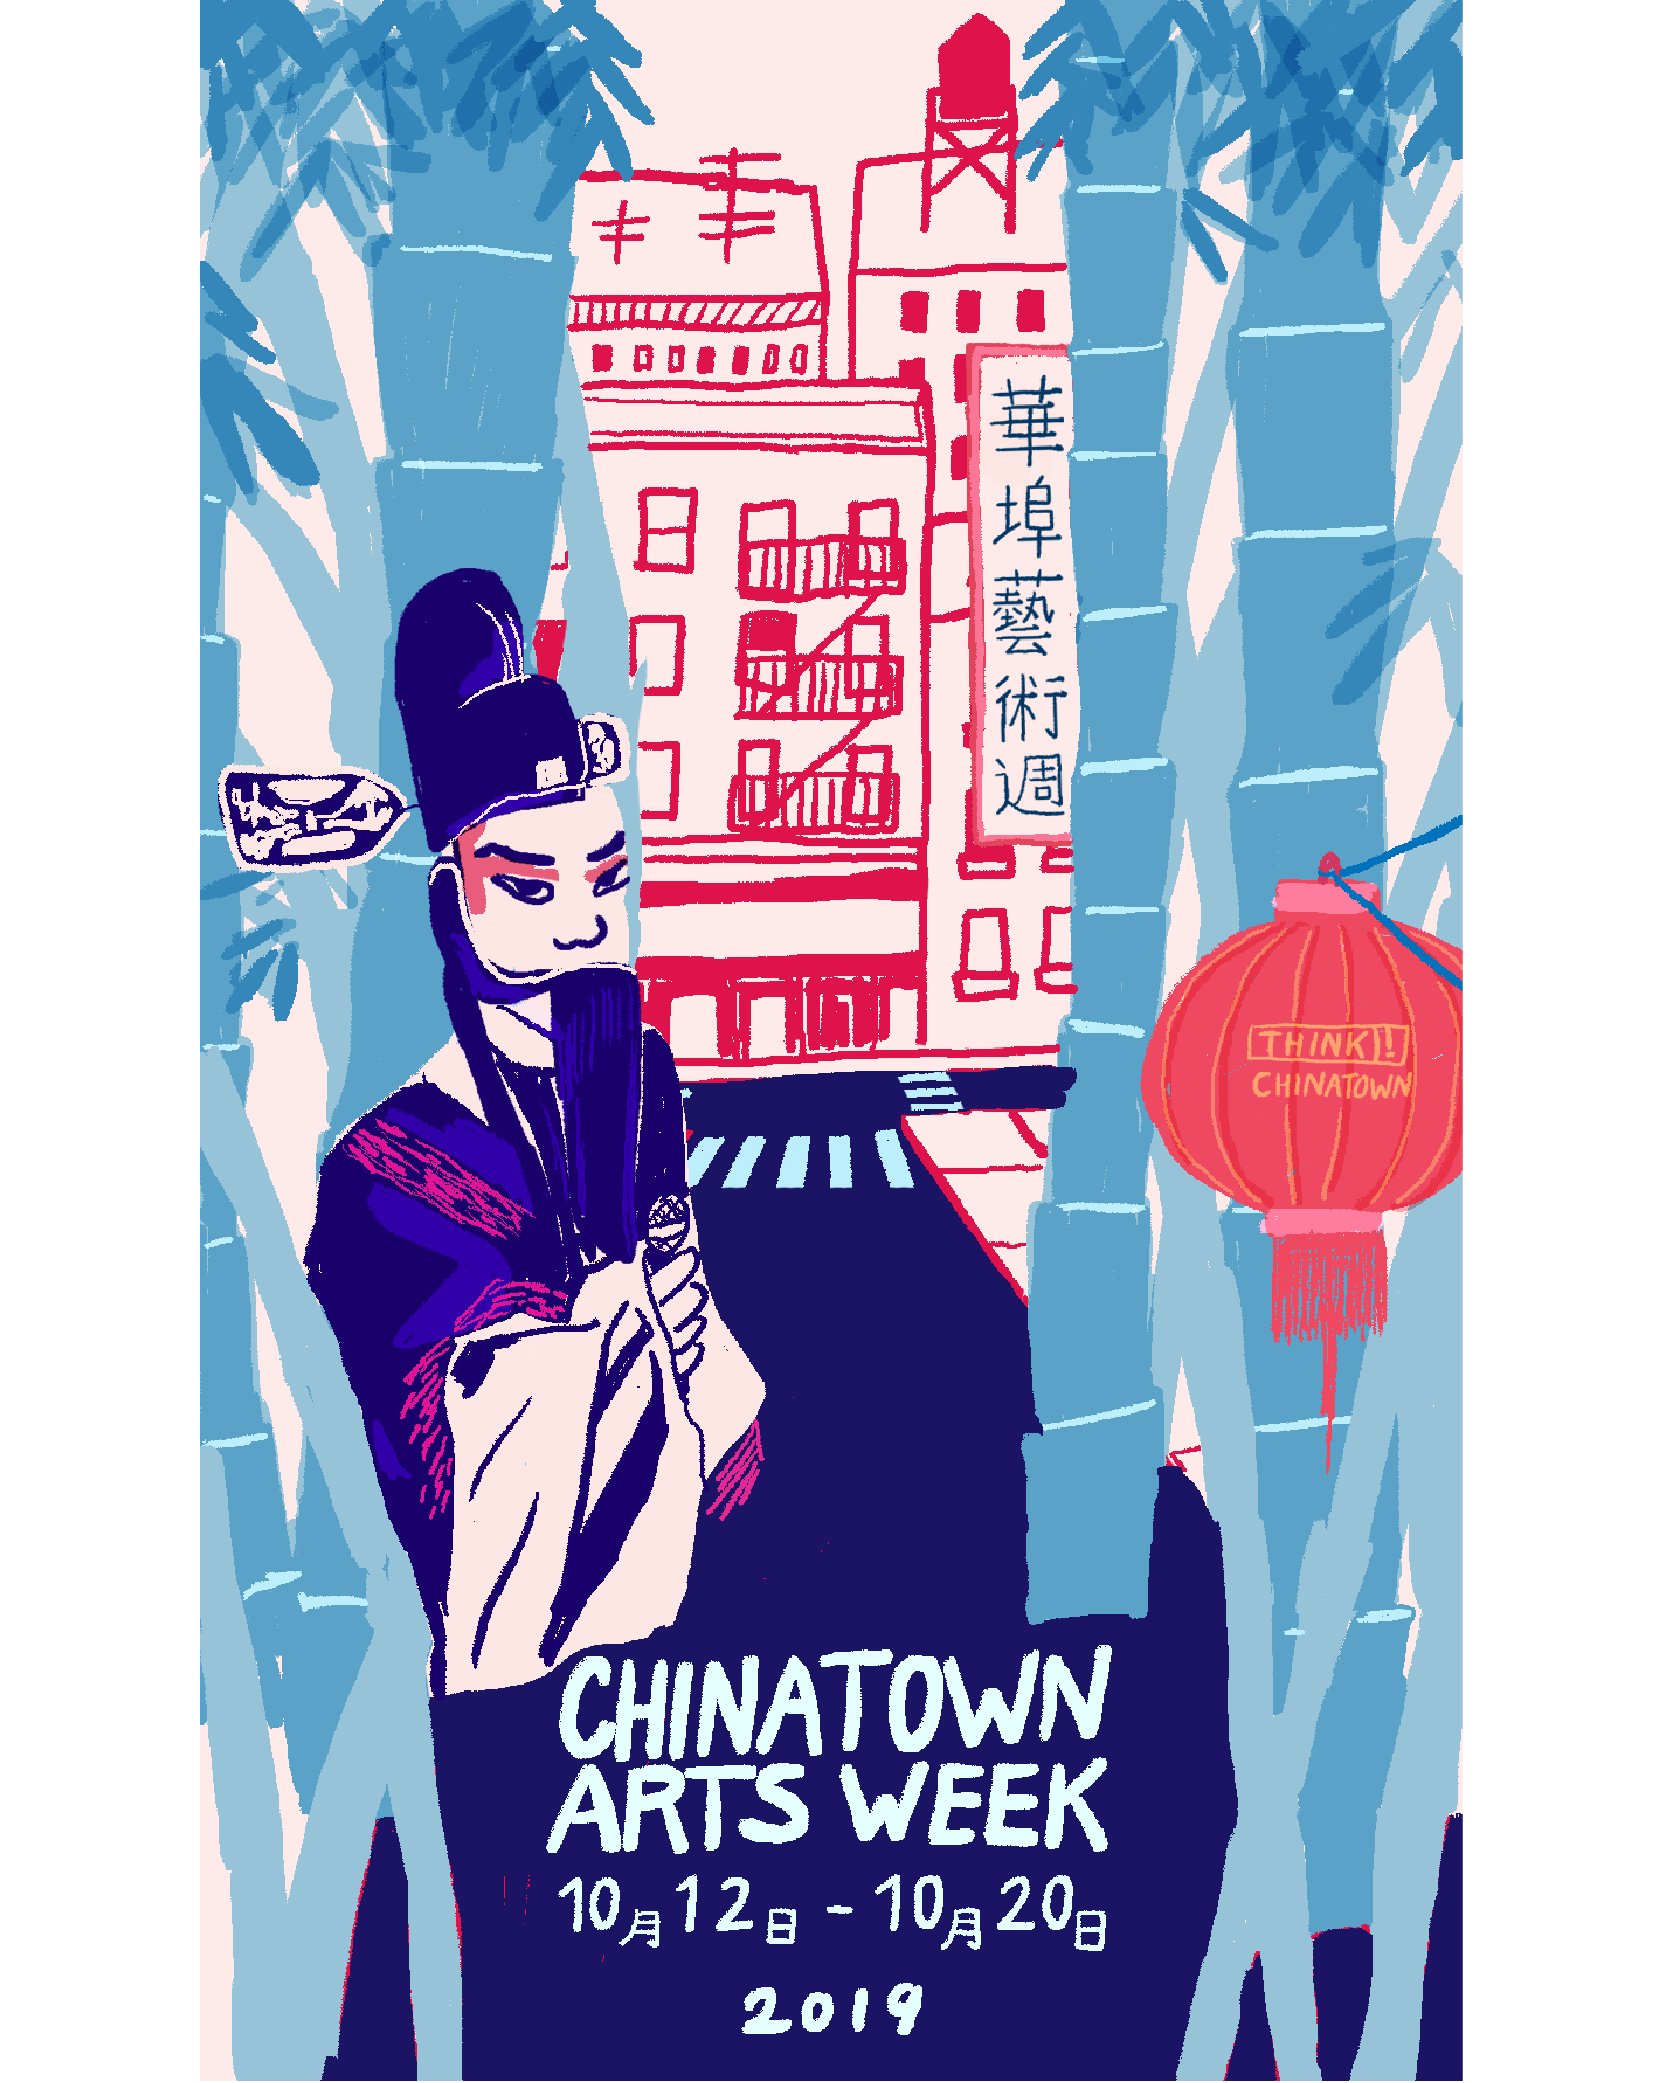  From Farm to Canal Street: Chinatown's Alternative